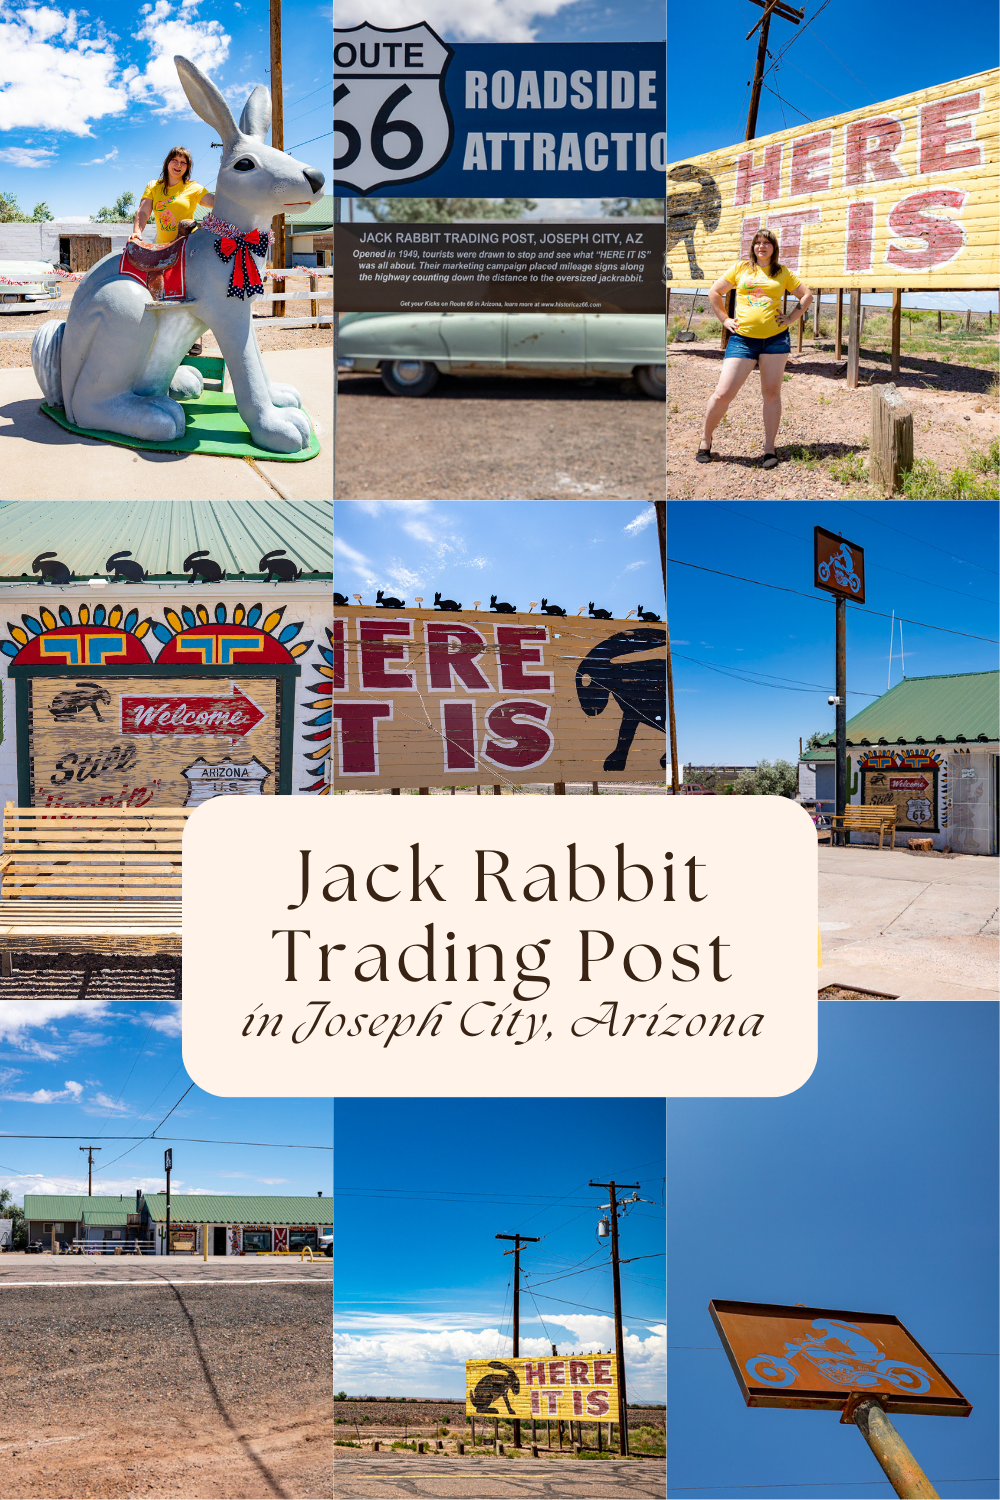 Here it is! Or should I say, hare it is! Jack Rabbit Trading Post in Joseph City, Arizona is a Route 66 institution that has been attracting travelers through clever marketing since the 1940s. Visit this souvenir shop and roadside attraction on your Route 66 road trip through Arizona. Add it to your travel itinerary and bucket list! #RoadsideAttraction #RoadsideAttractions #Route66RoadsideAttraction #ArizonaRoadsideAttraction #RoadTrip #ArizonaRoadTrip #ArizonaRoute66 #Route66#RoadsideAttraction #RoadsideAttractions #Route66RoadsideAttraction #ArizonaRoadsideAttraction #RoadTrip #ArizonaRoadTrip #ArizonaRoute66 #Route66